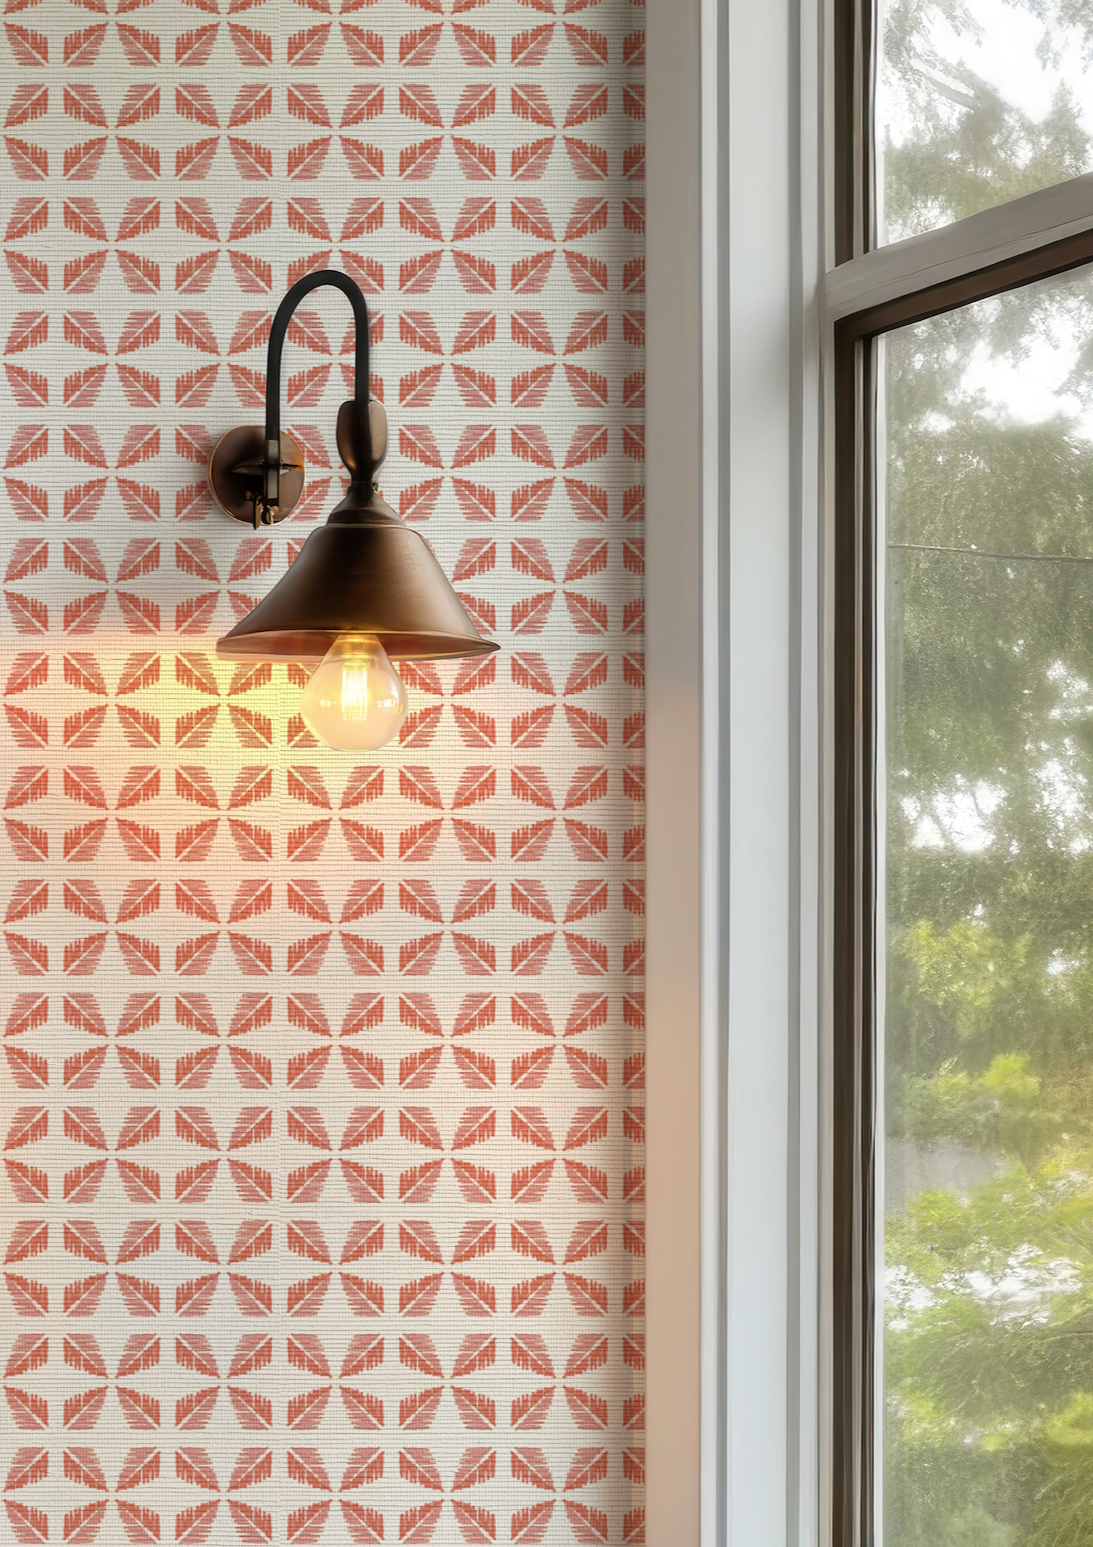 Geometric Leaves Coral and White Wallpaper